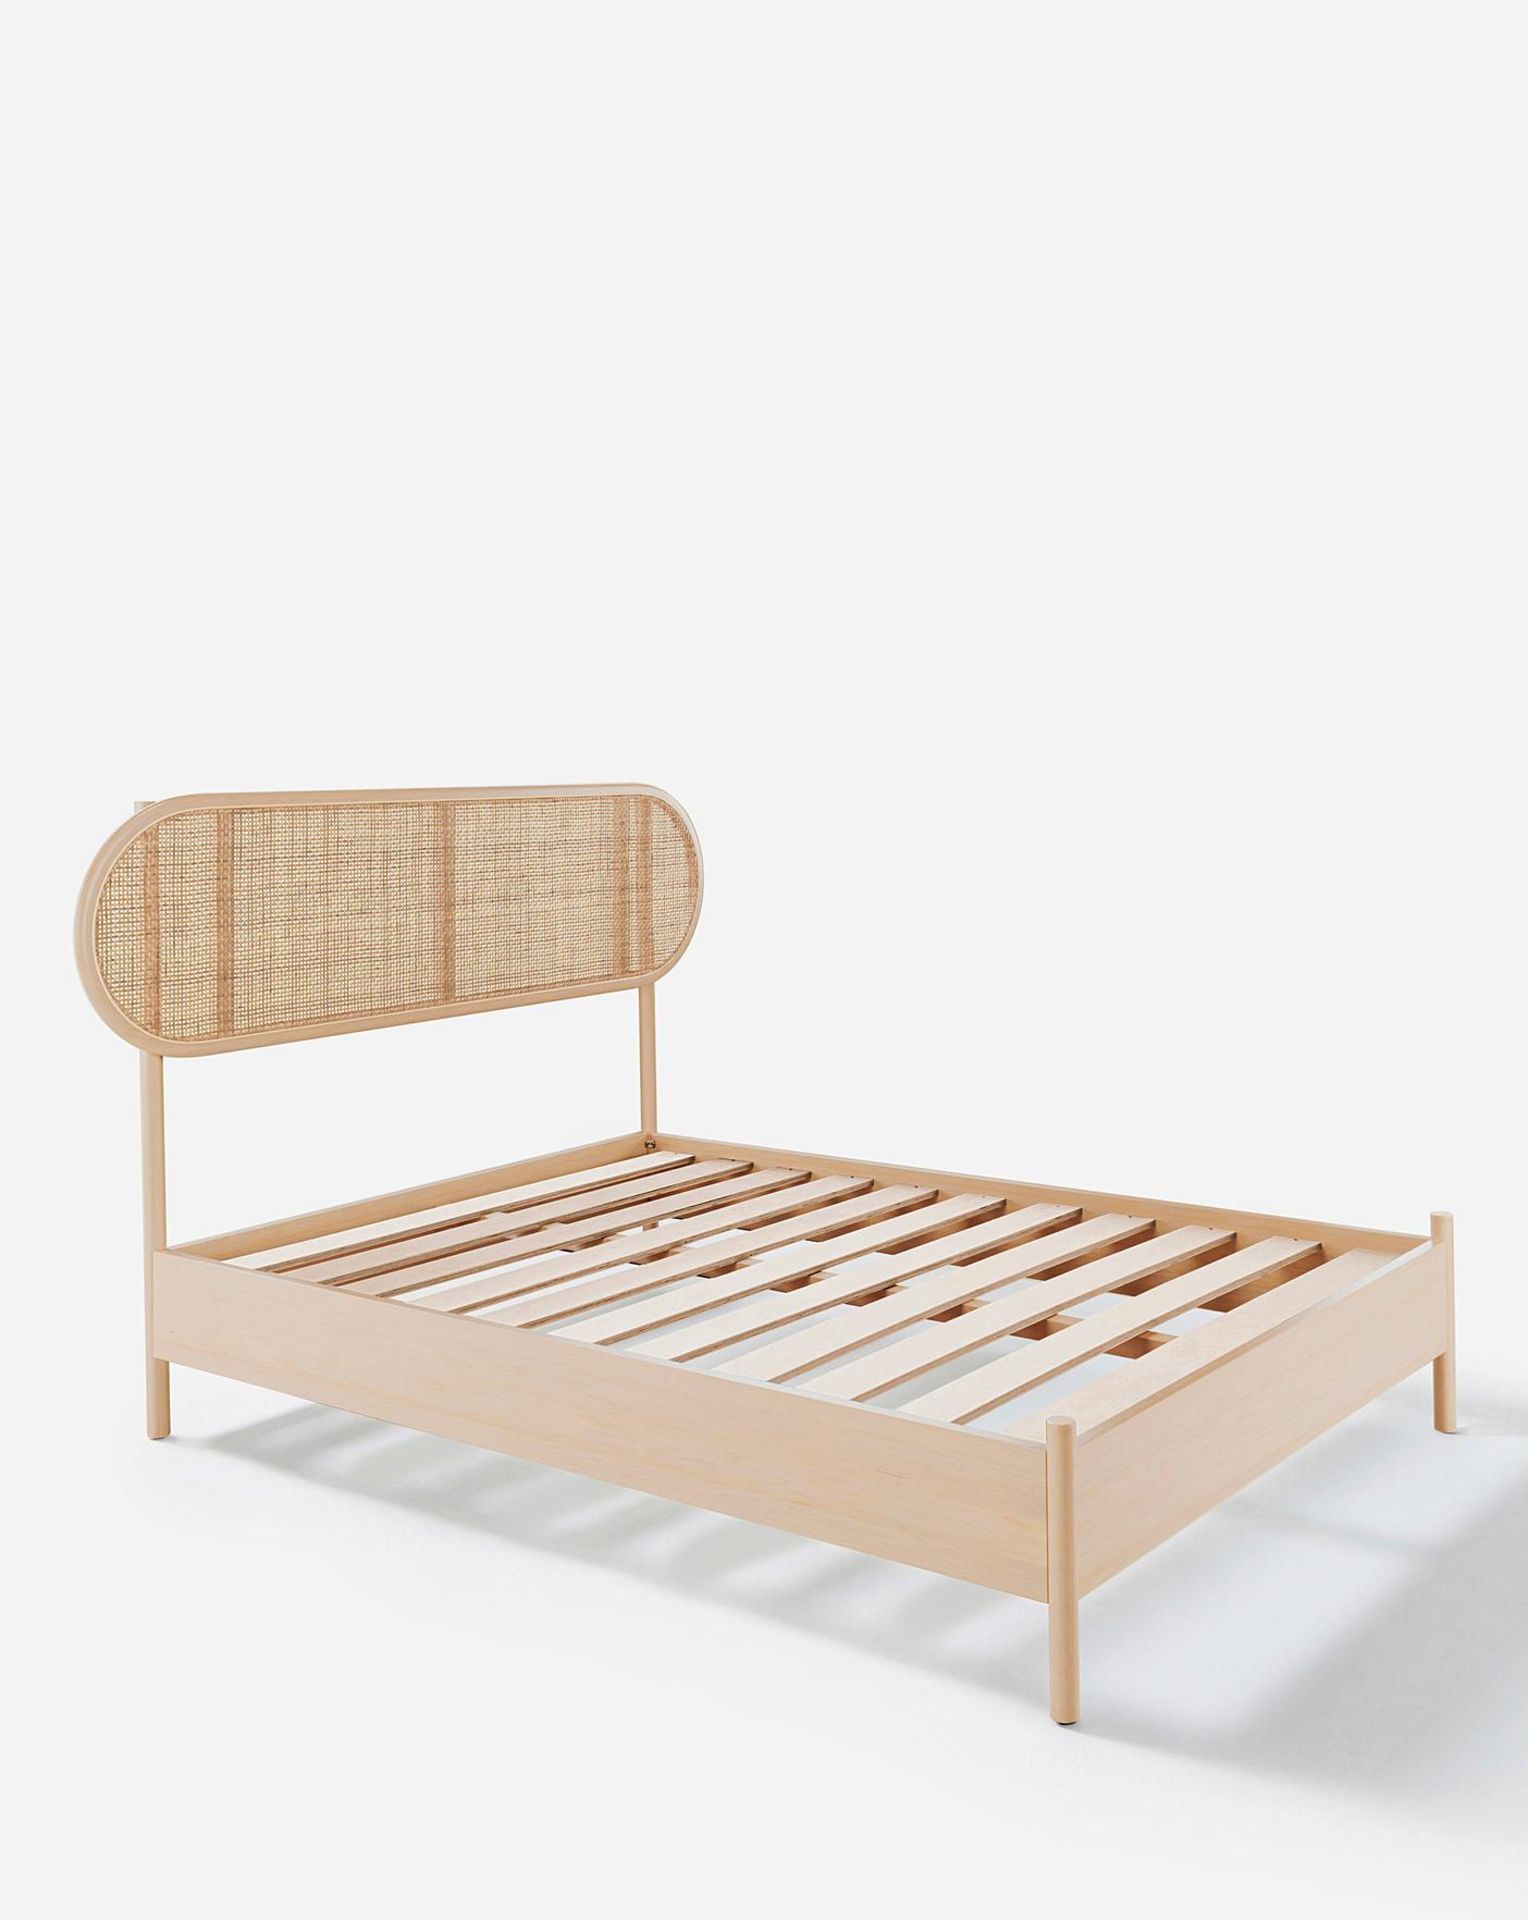 BRAND NEW AULIARATTAN BED FRAME KING SIZE S1R10, NATURAL LUXUEY DESIGN FOR ANY STYLE. - Bild 2 aus 2